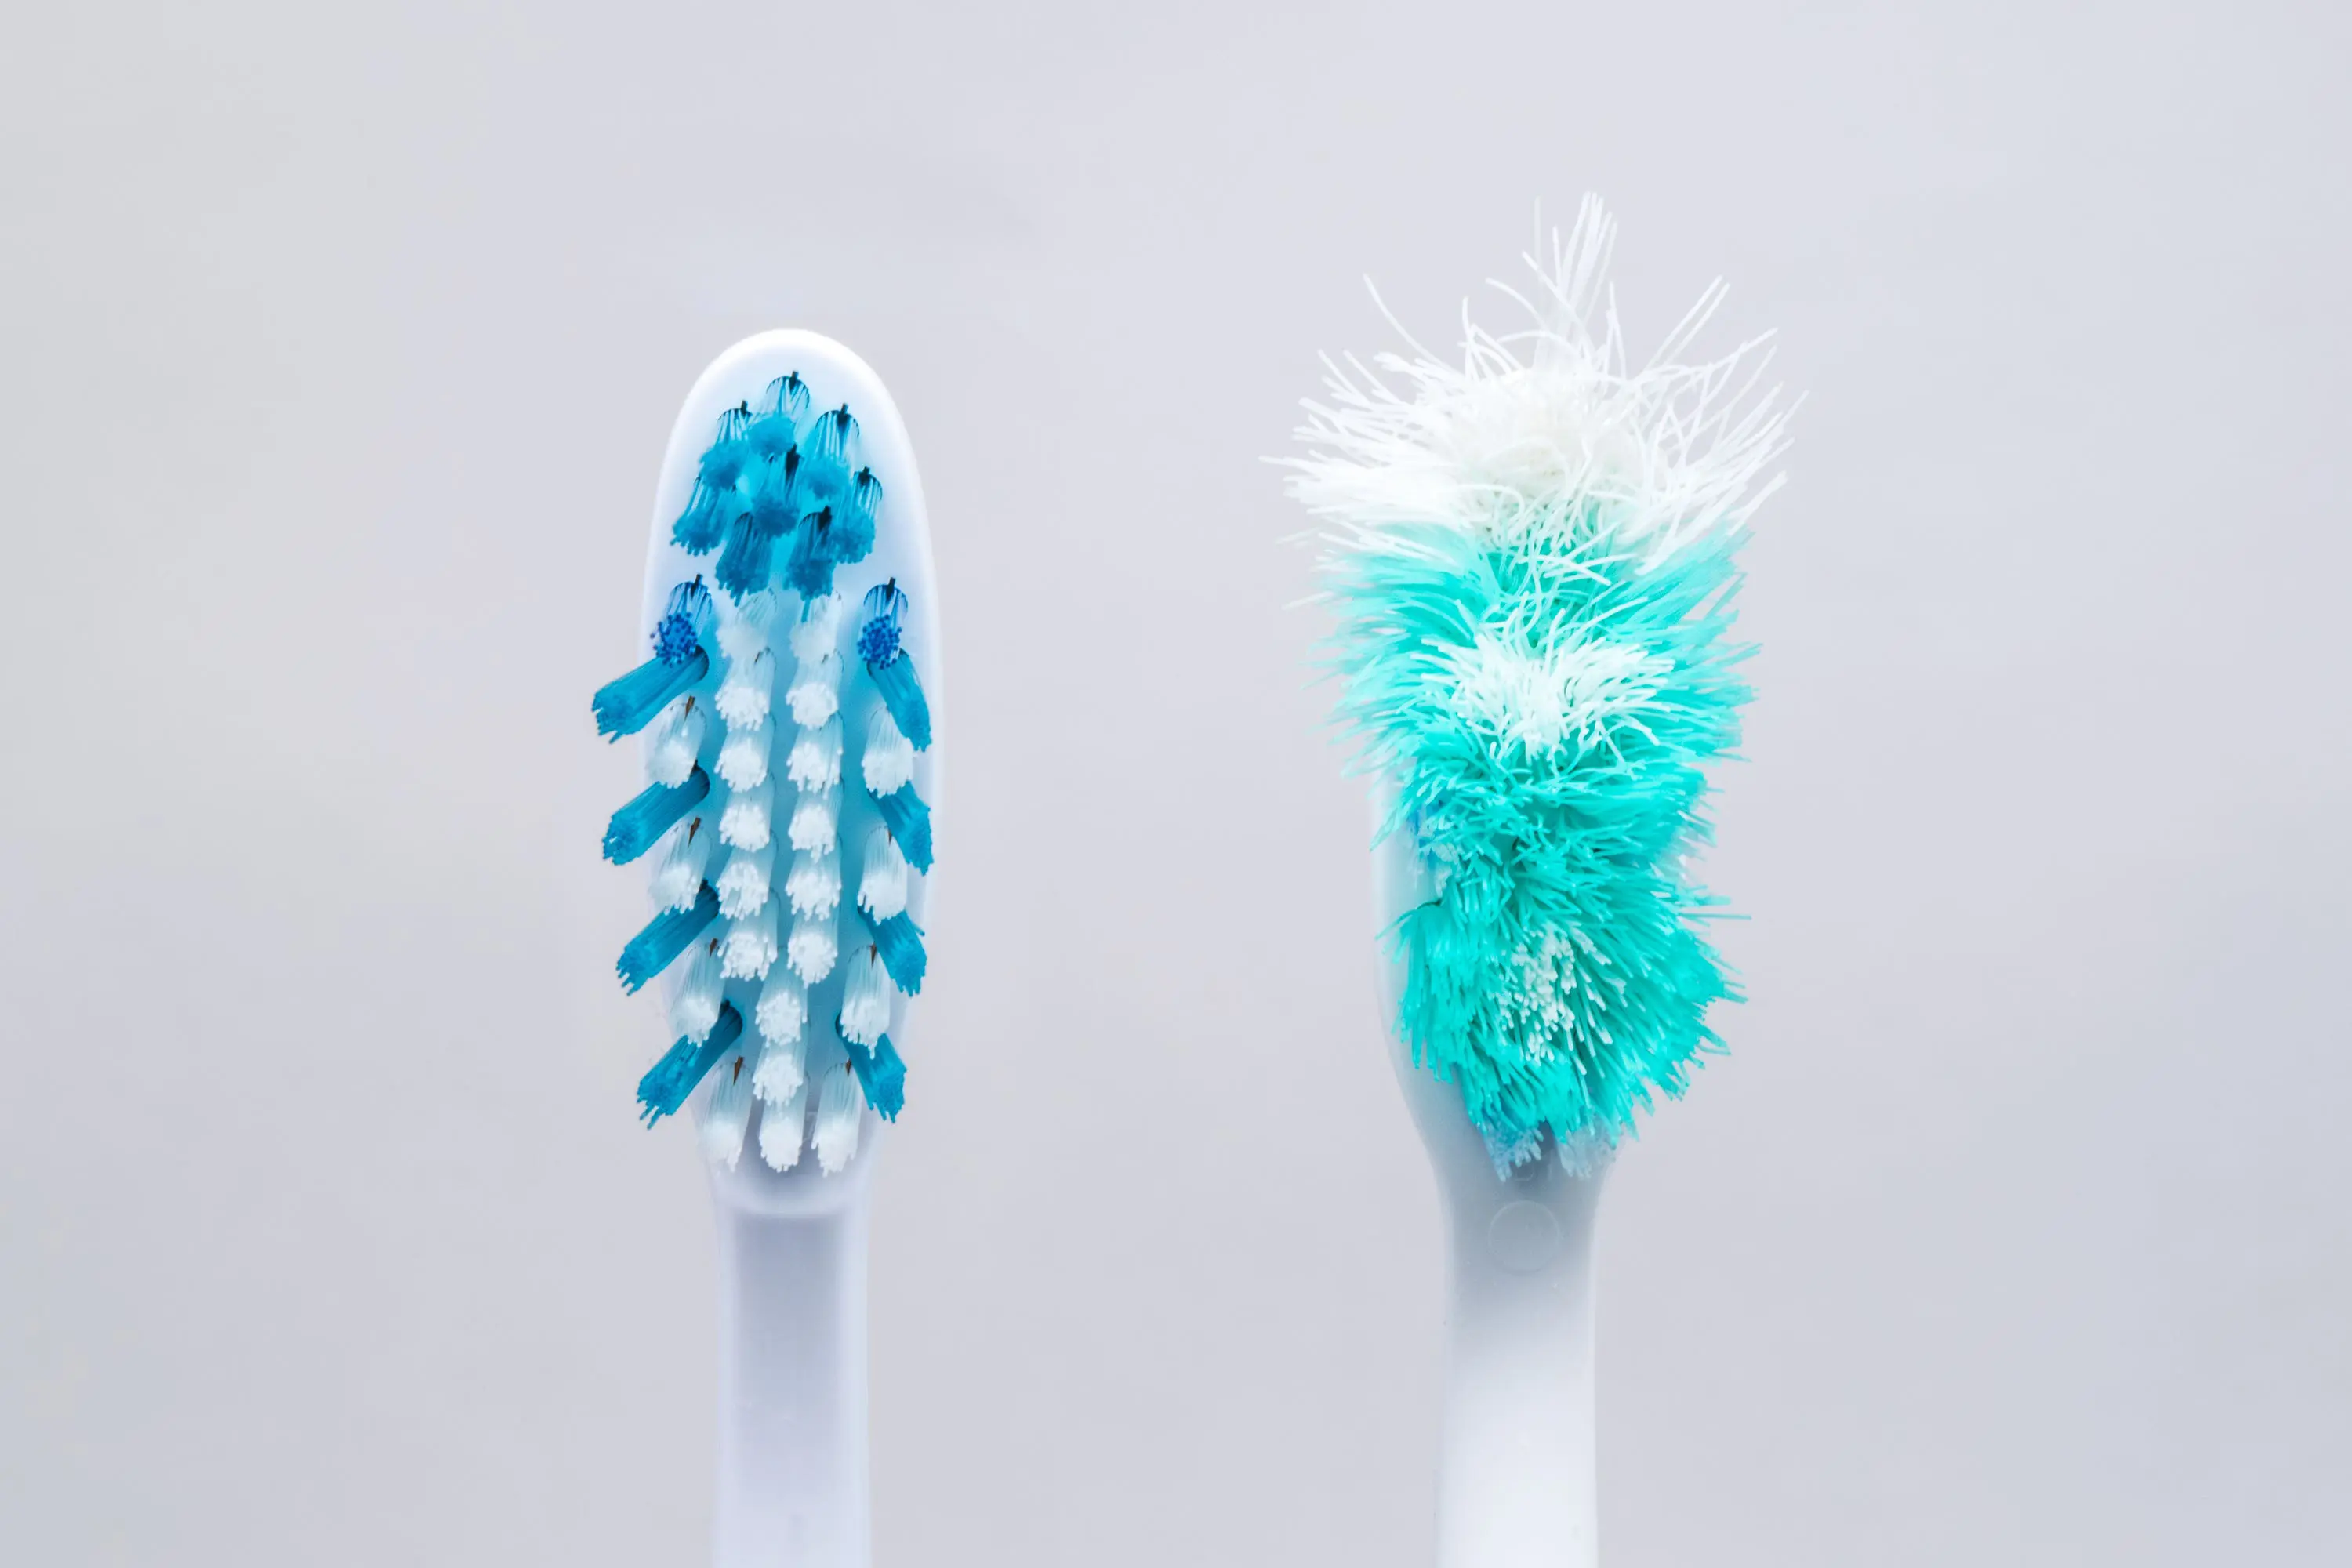 Toothbrushes new and old scaled